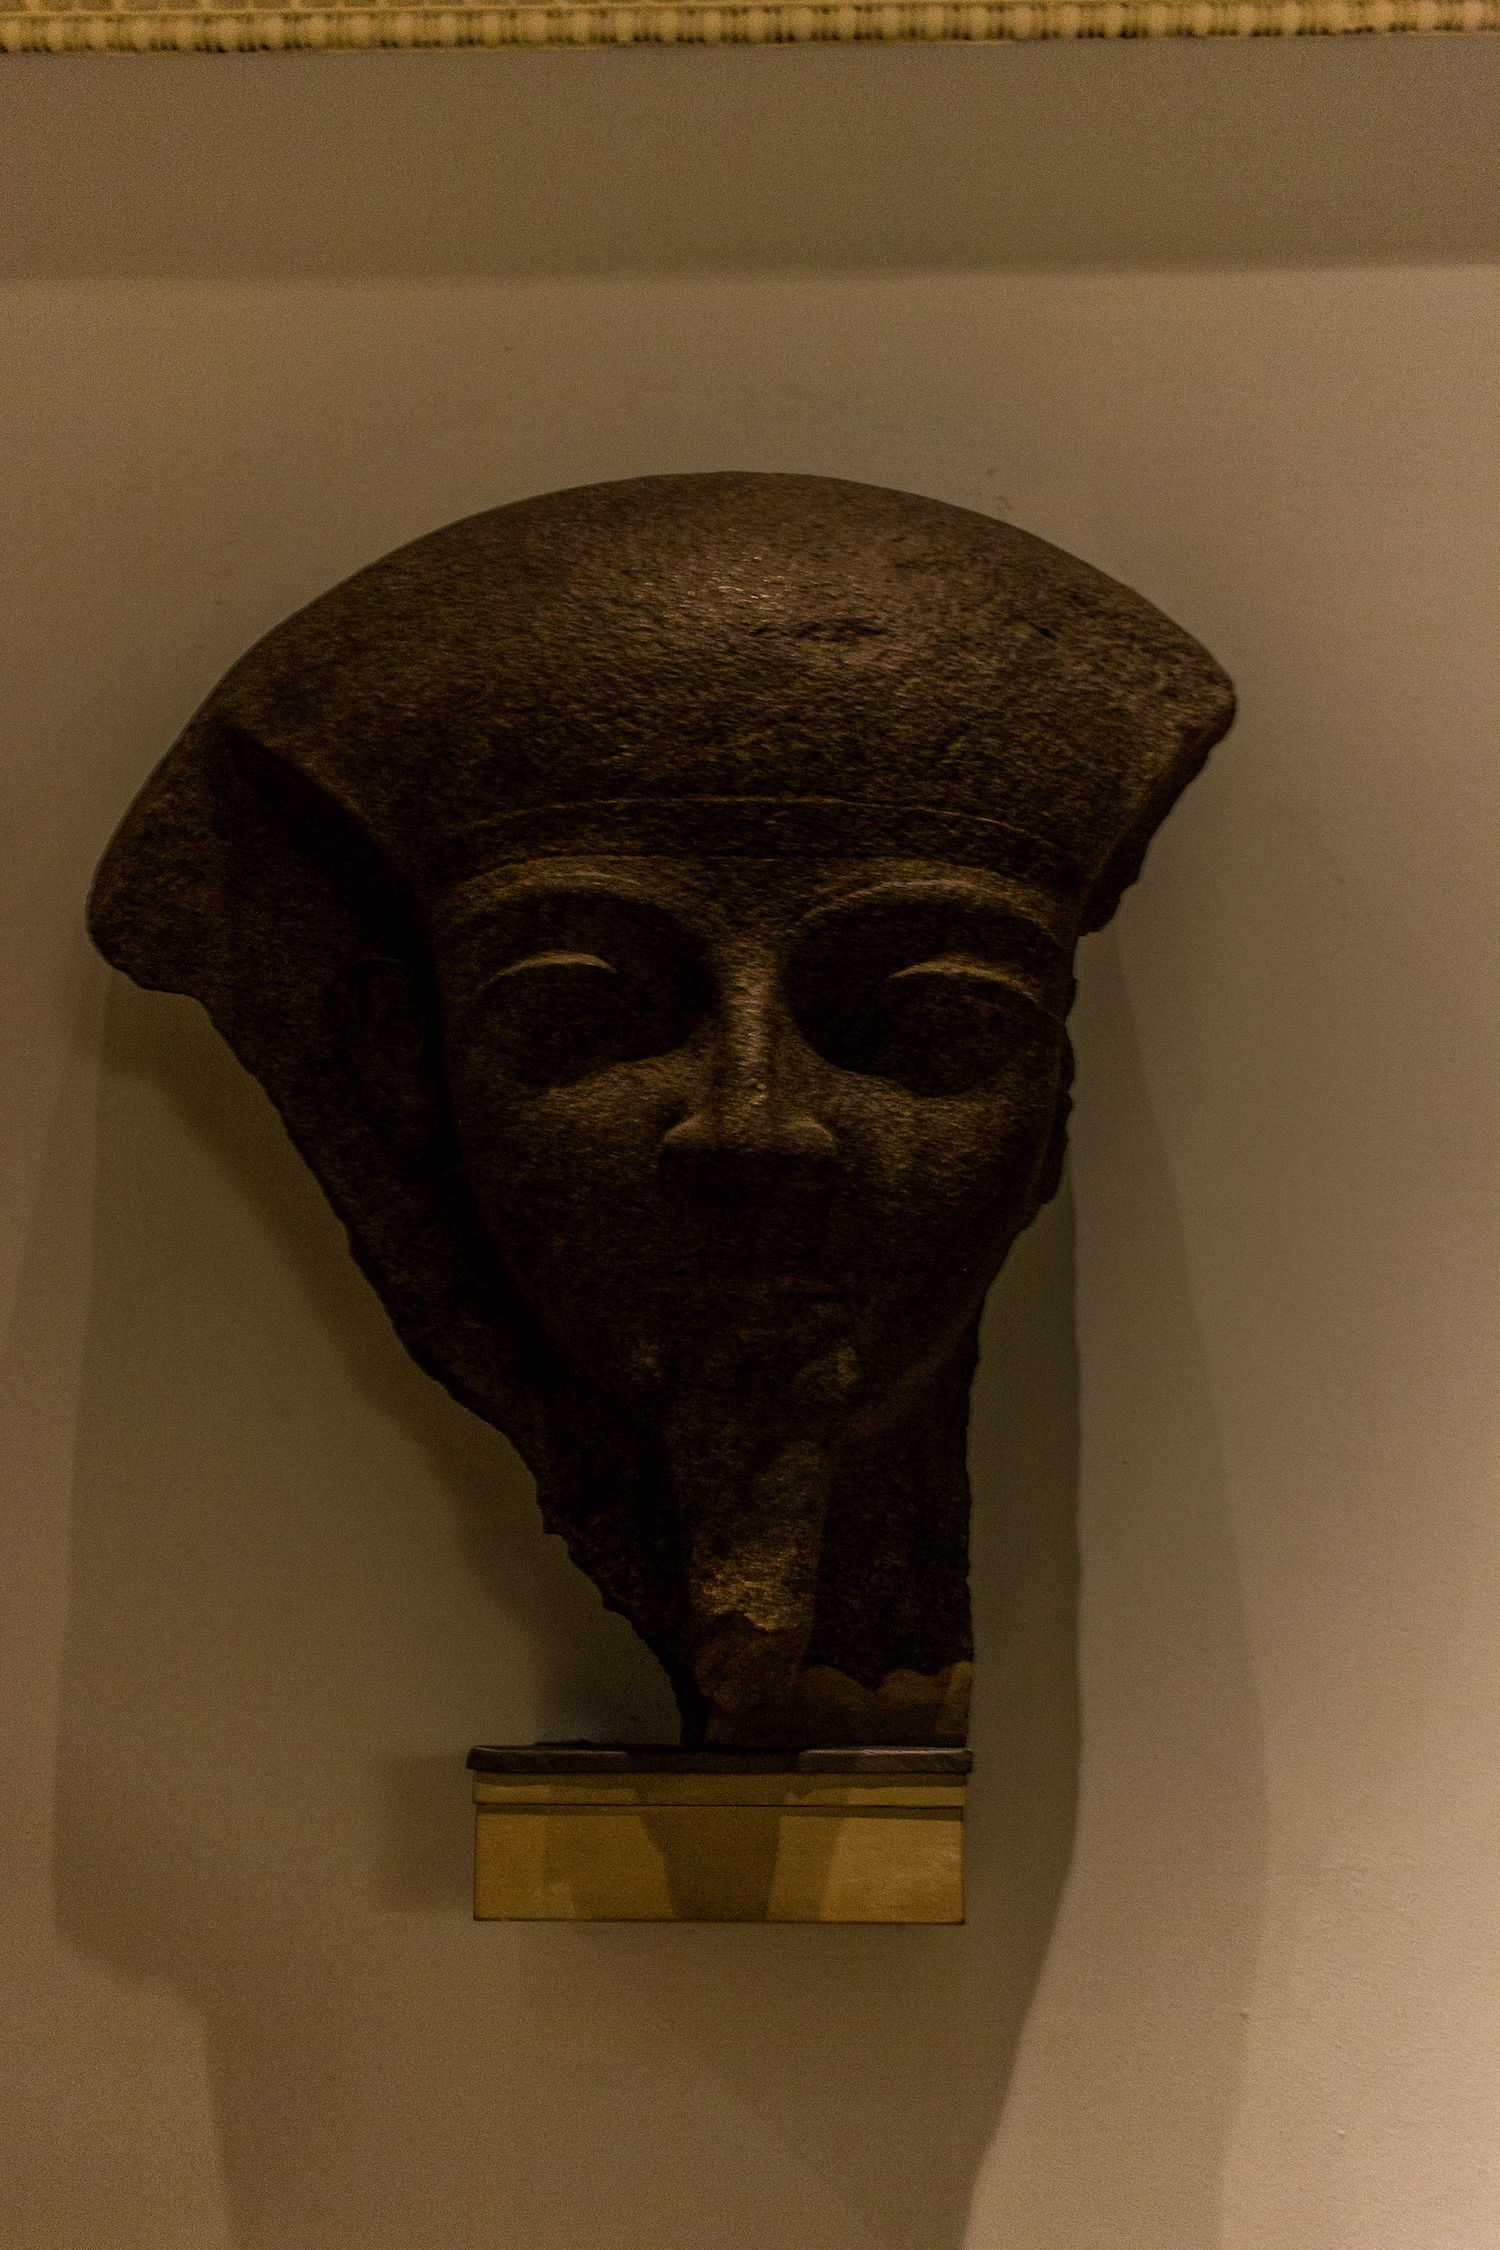 Professional Photography Stone Sculpture From Kemet Egypt Of King Tuthmosis IV In British Museum London